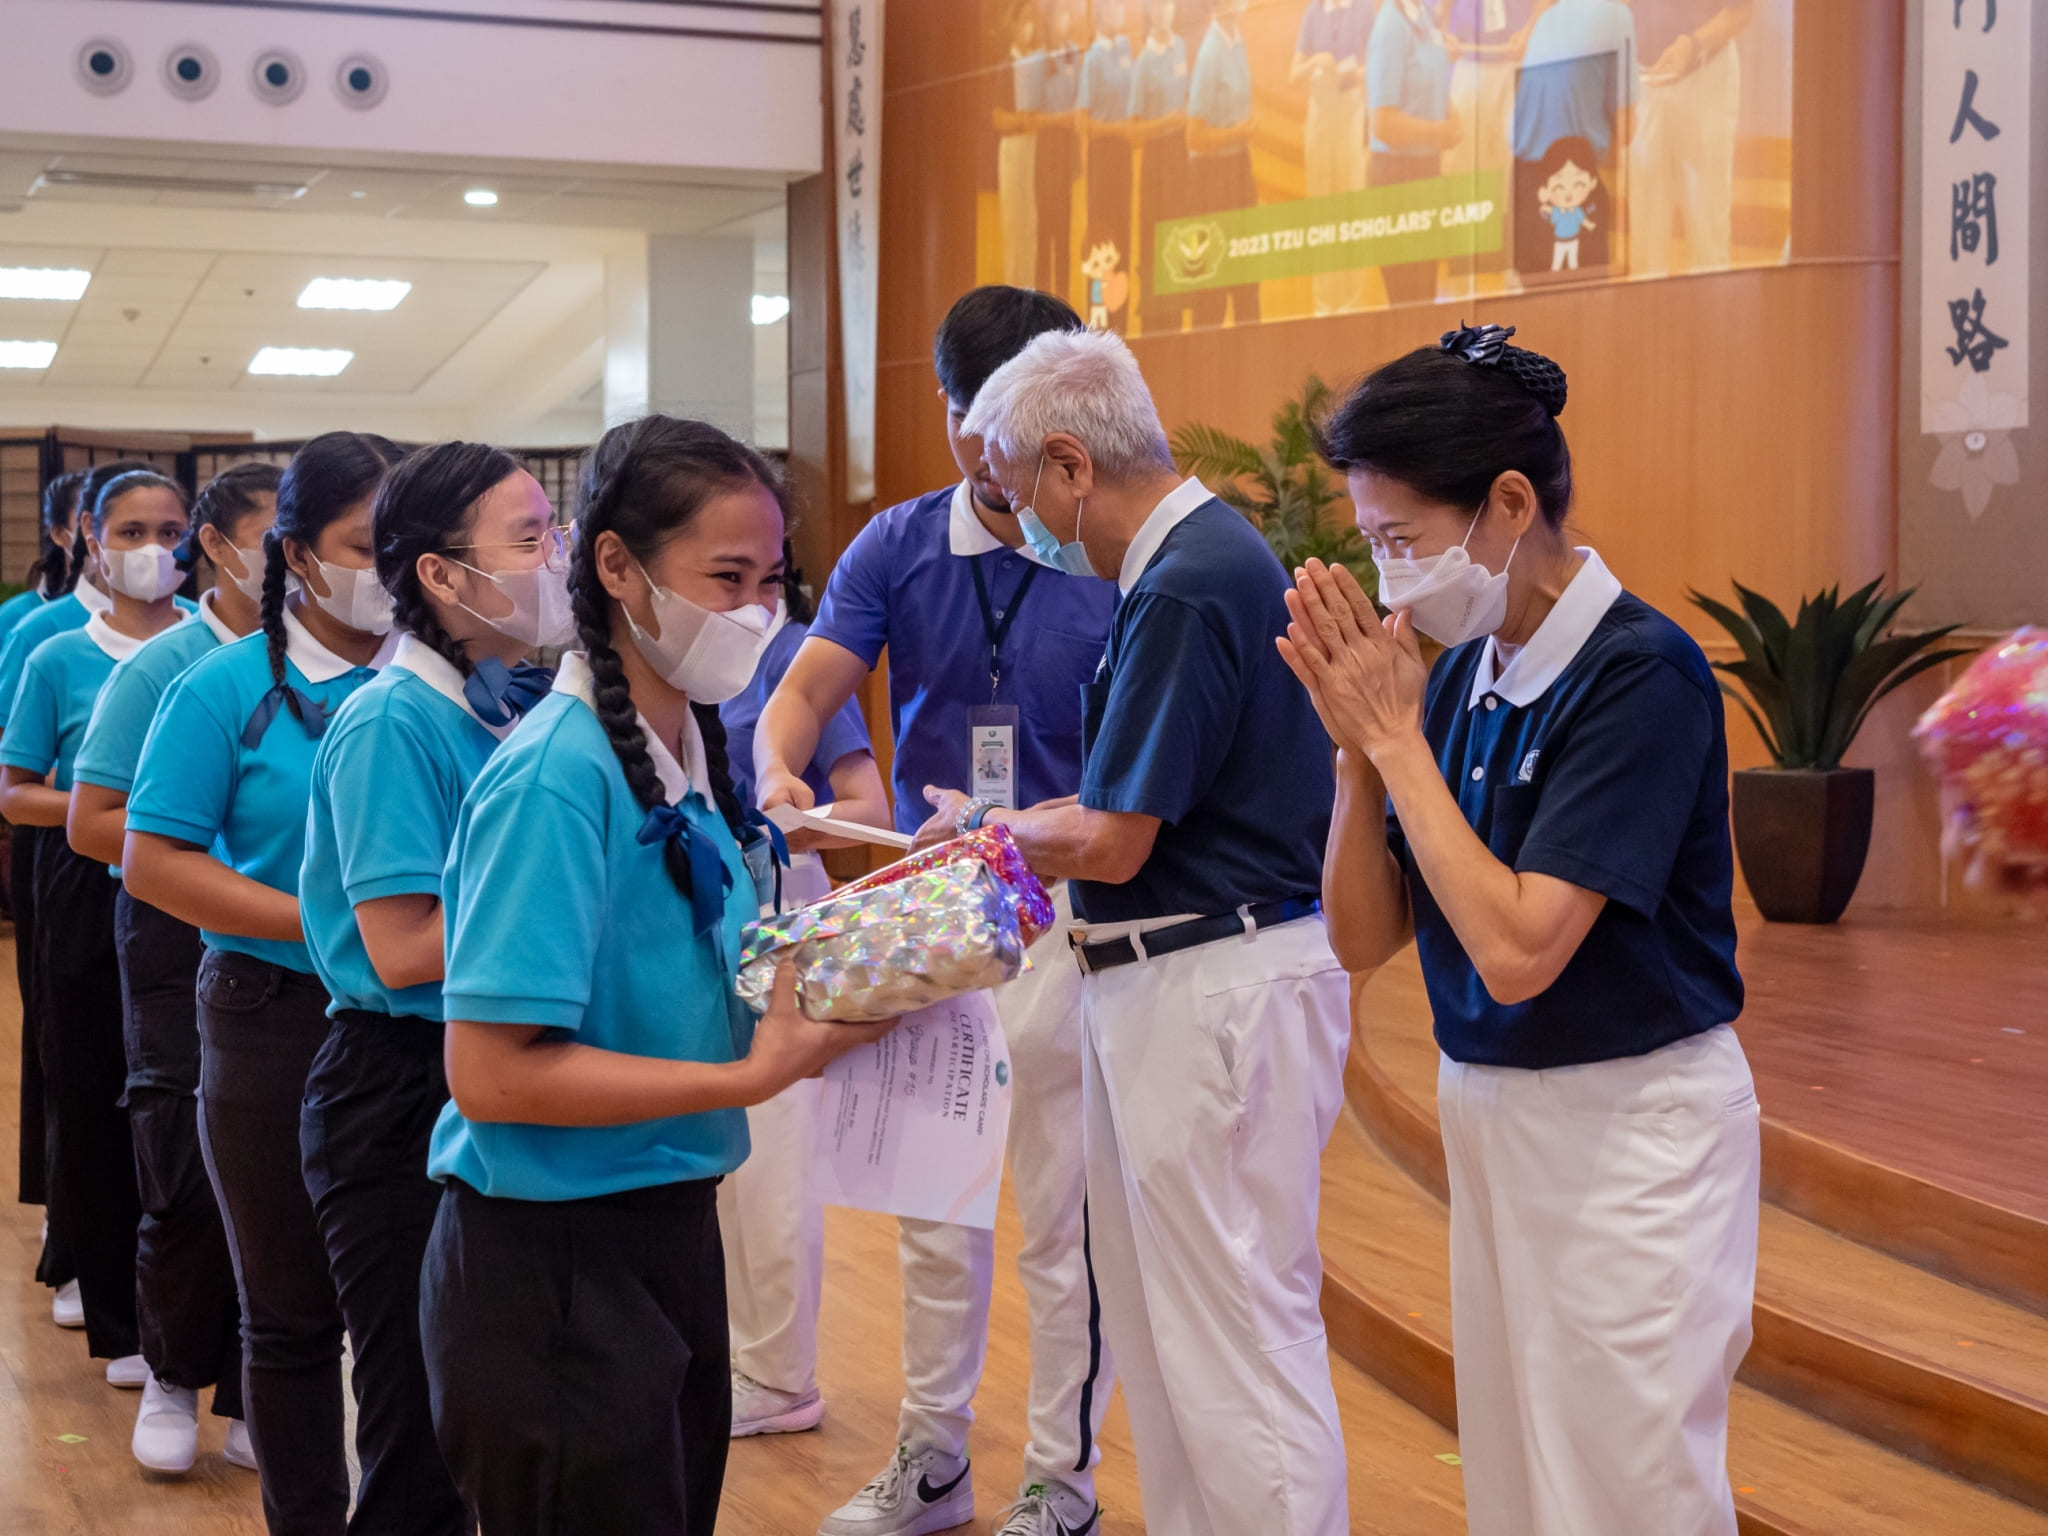 Scholars line up as they get their camp souvenirs. 【Photo by Daniel Lazar】